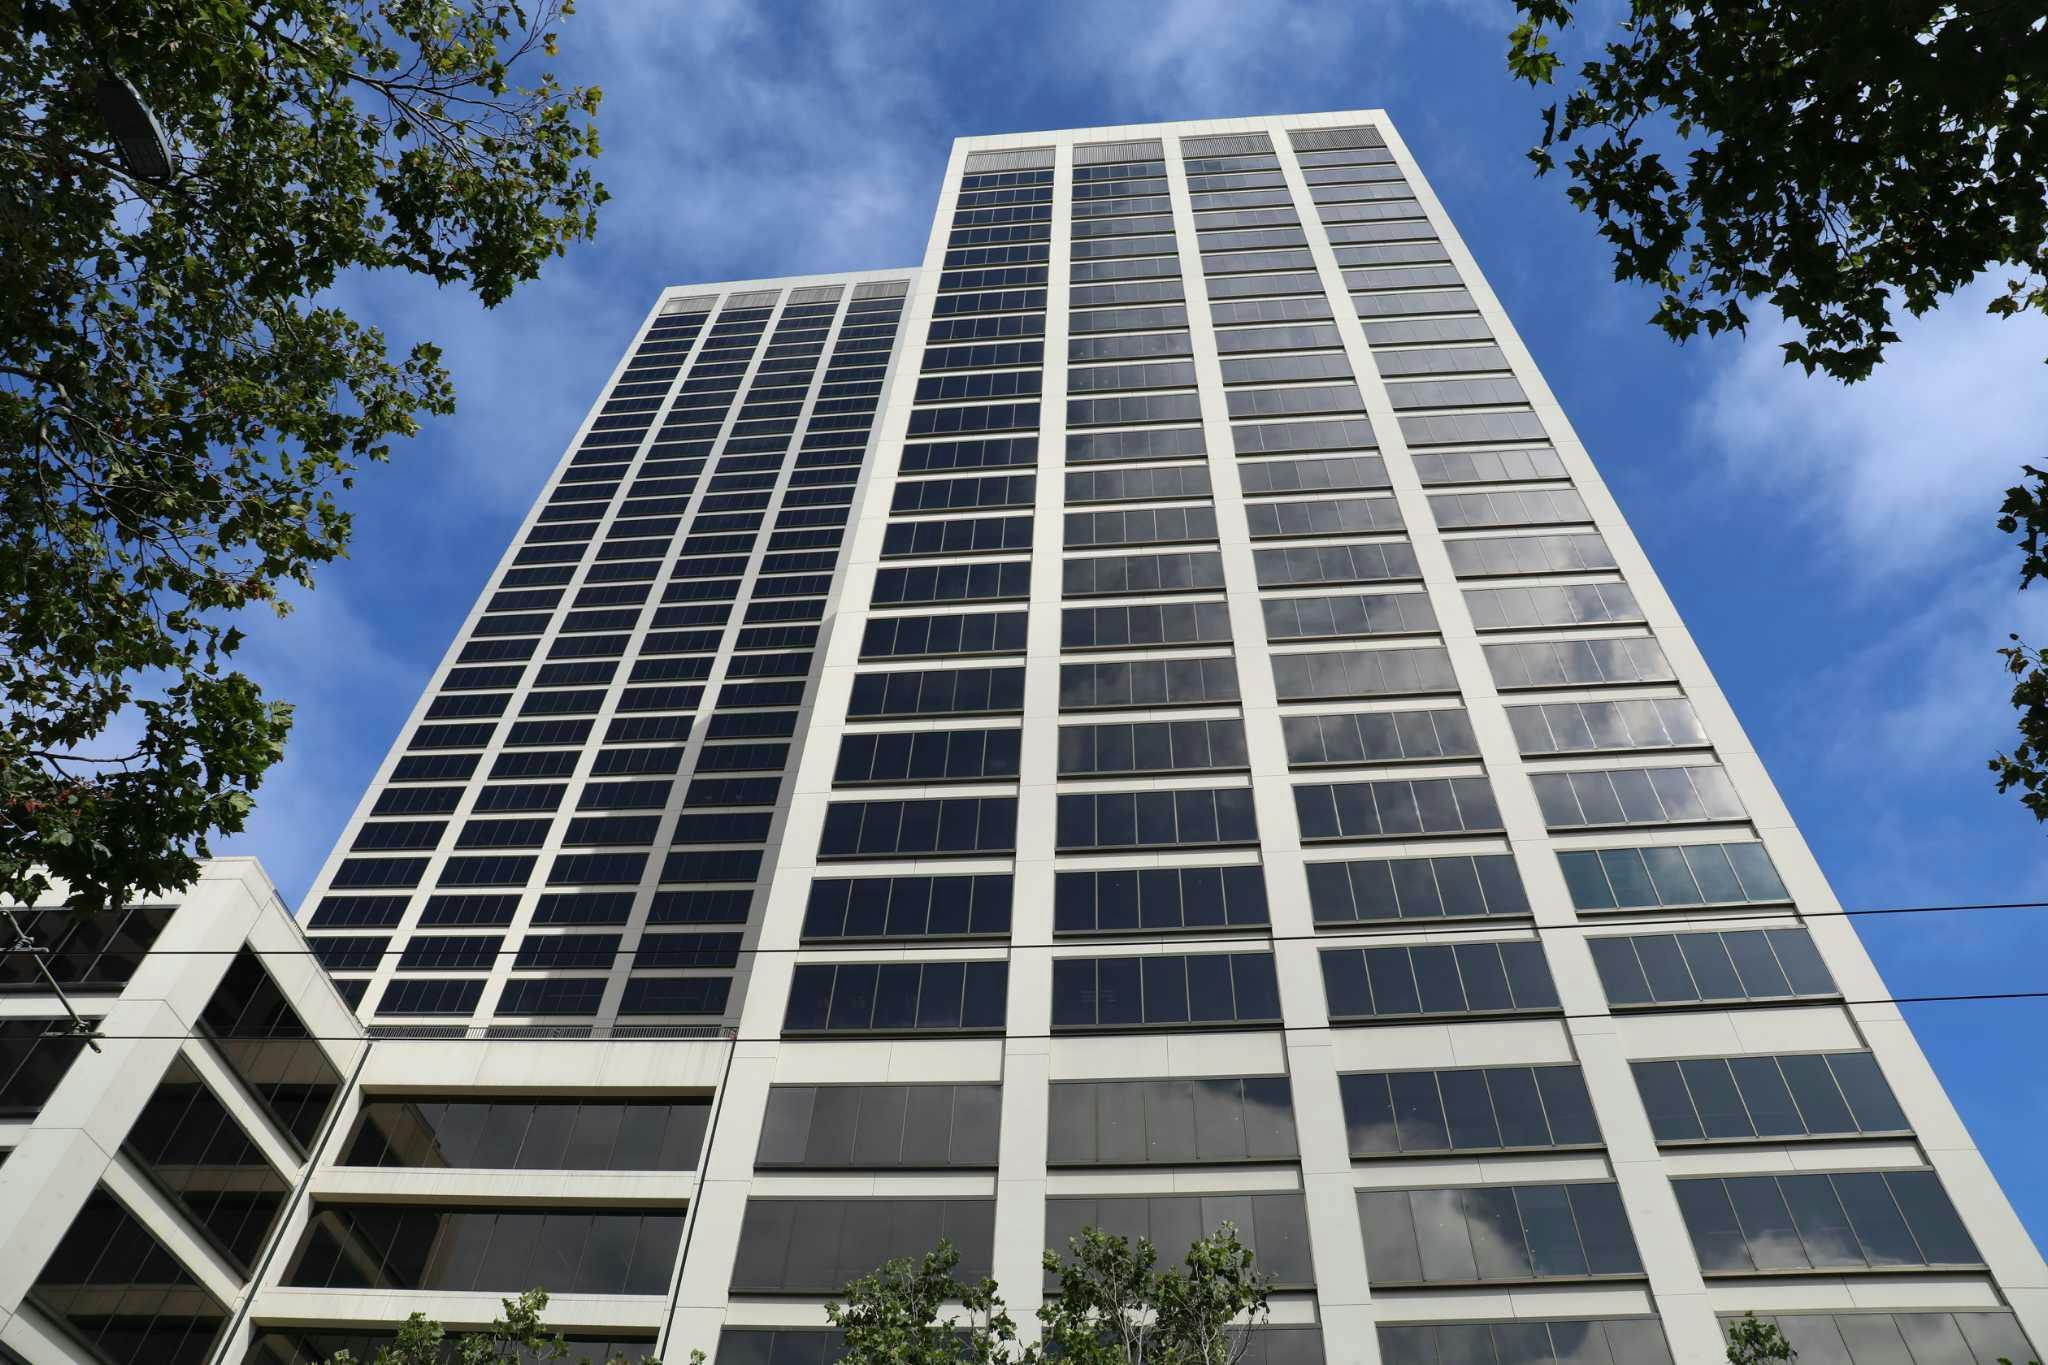 Google to Exit 300,000 Sq Ft Office in SF's Spear Tower, Following Visa